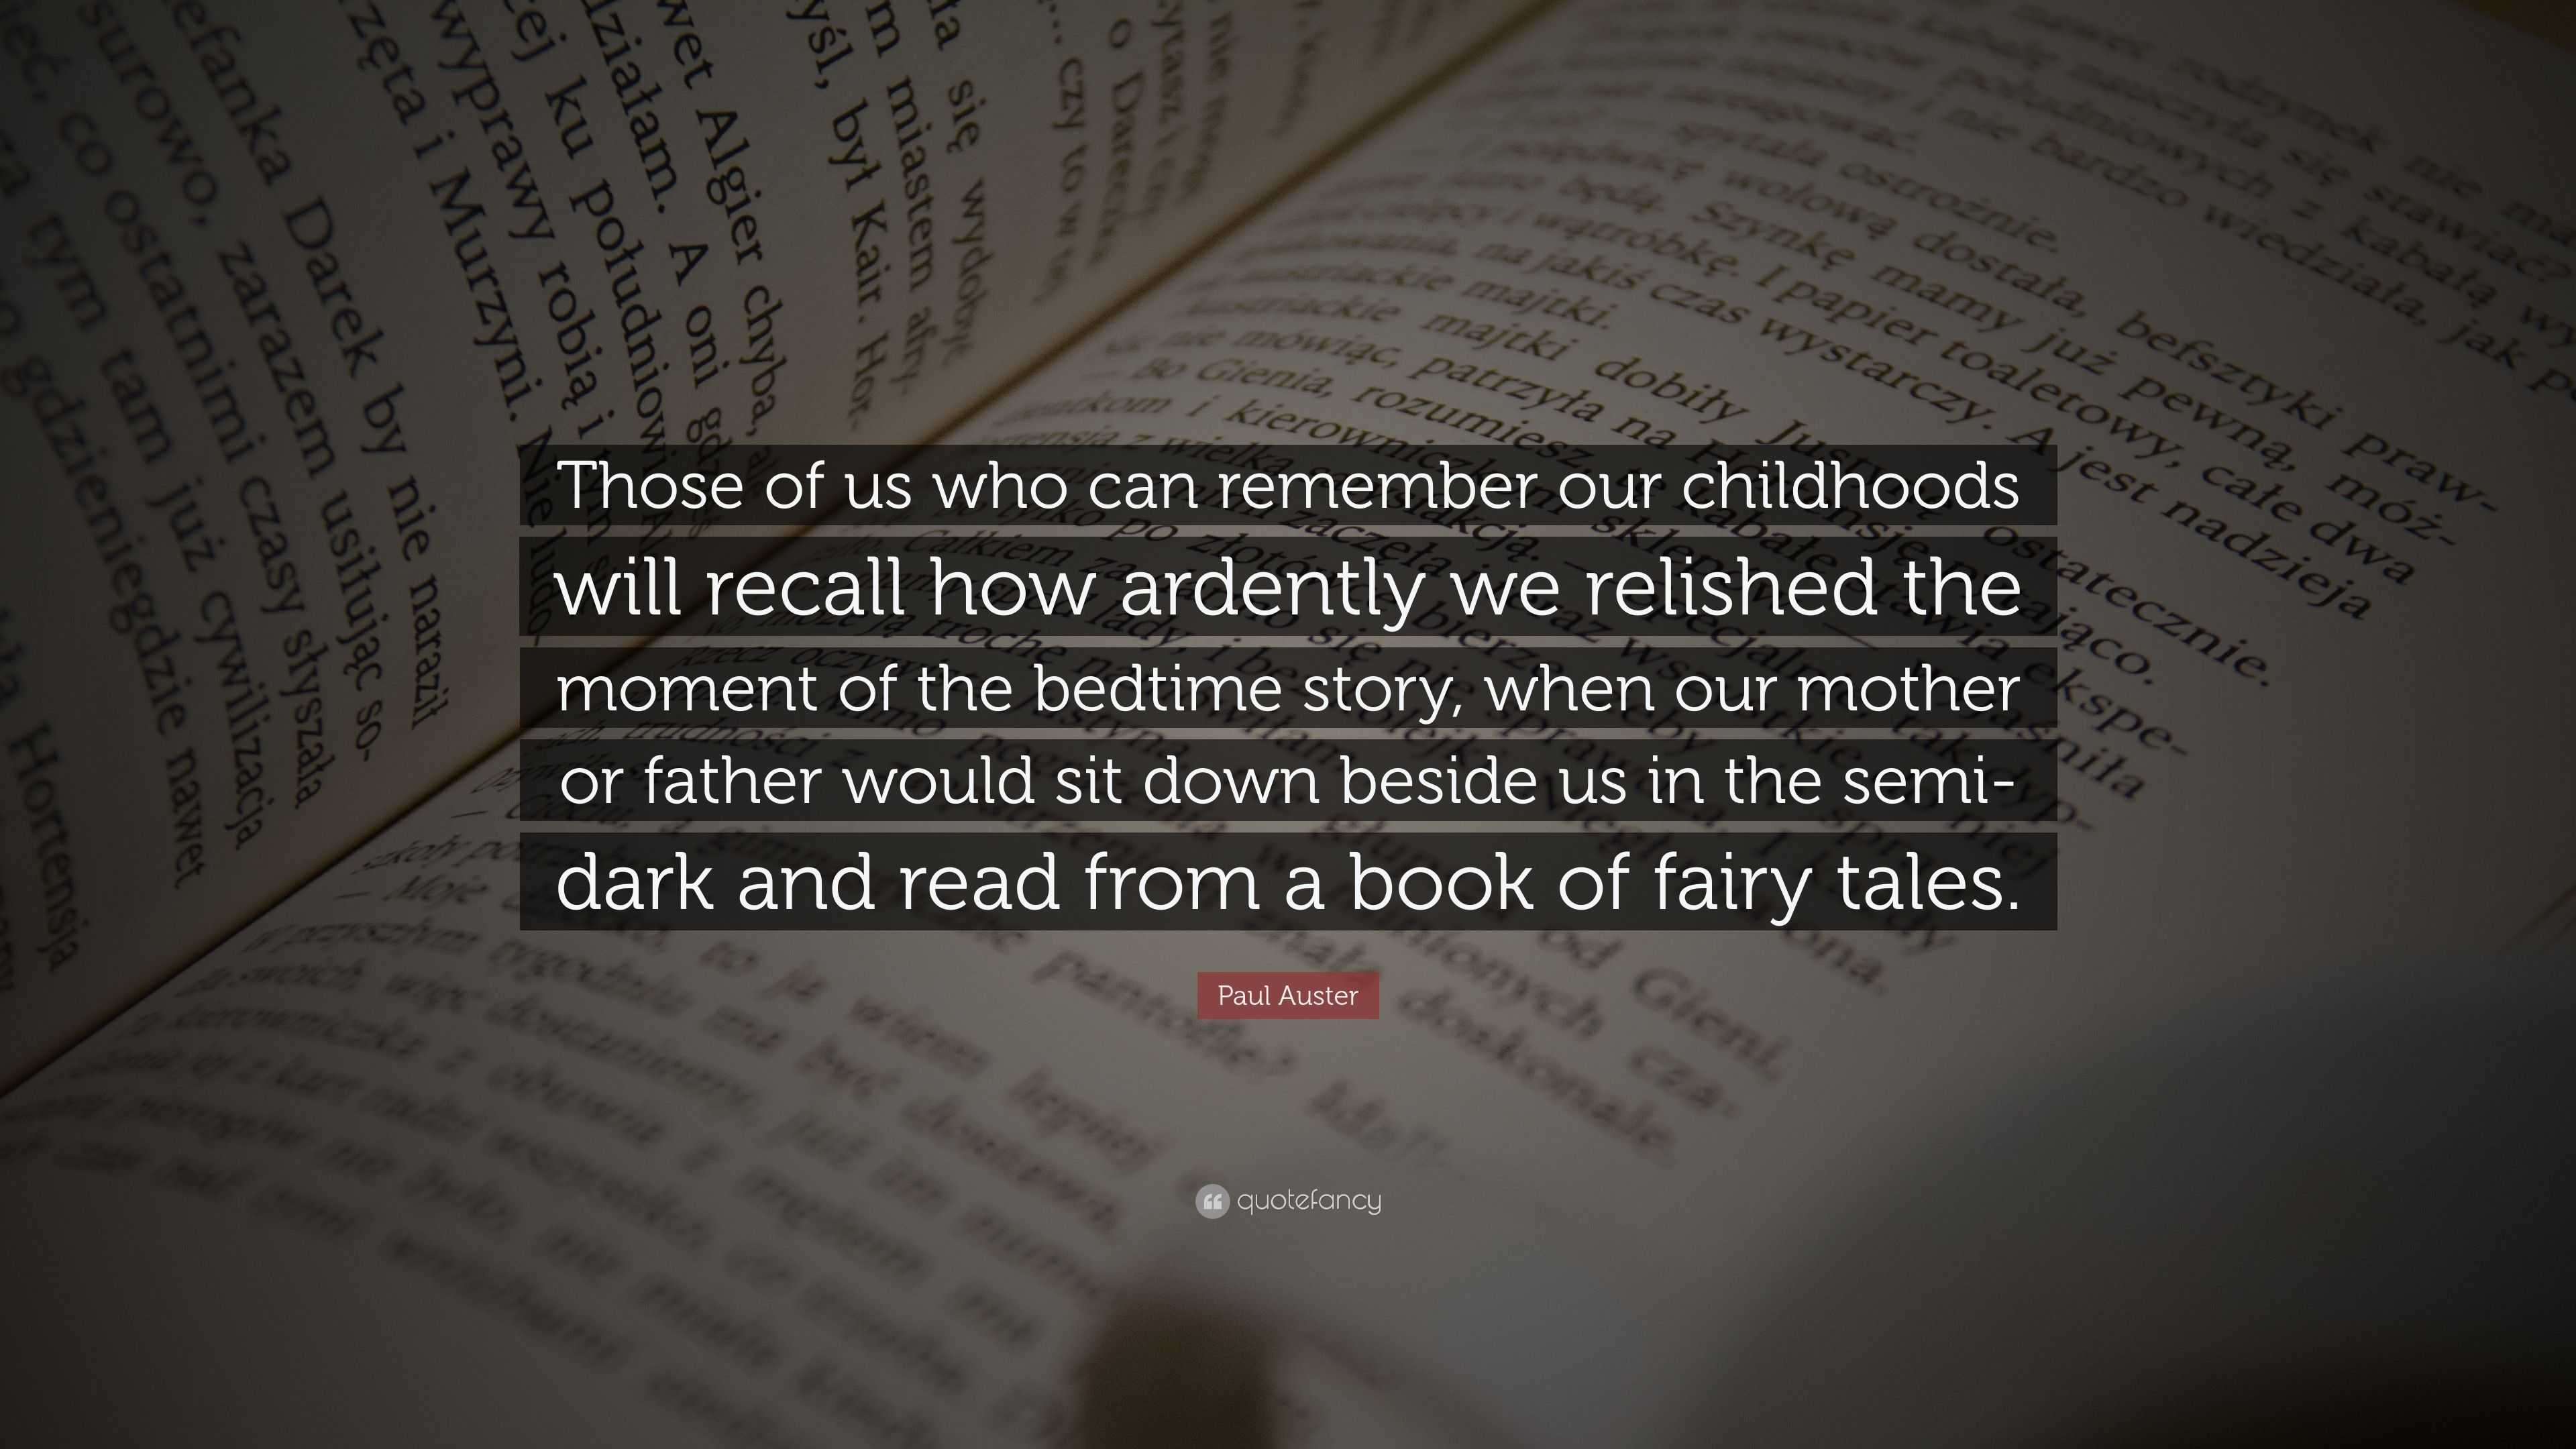 Paul Auster Quote: “Those of us who can remember our childhoods will recall  how ardently we relished the moment of the bedtime story, when o”